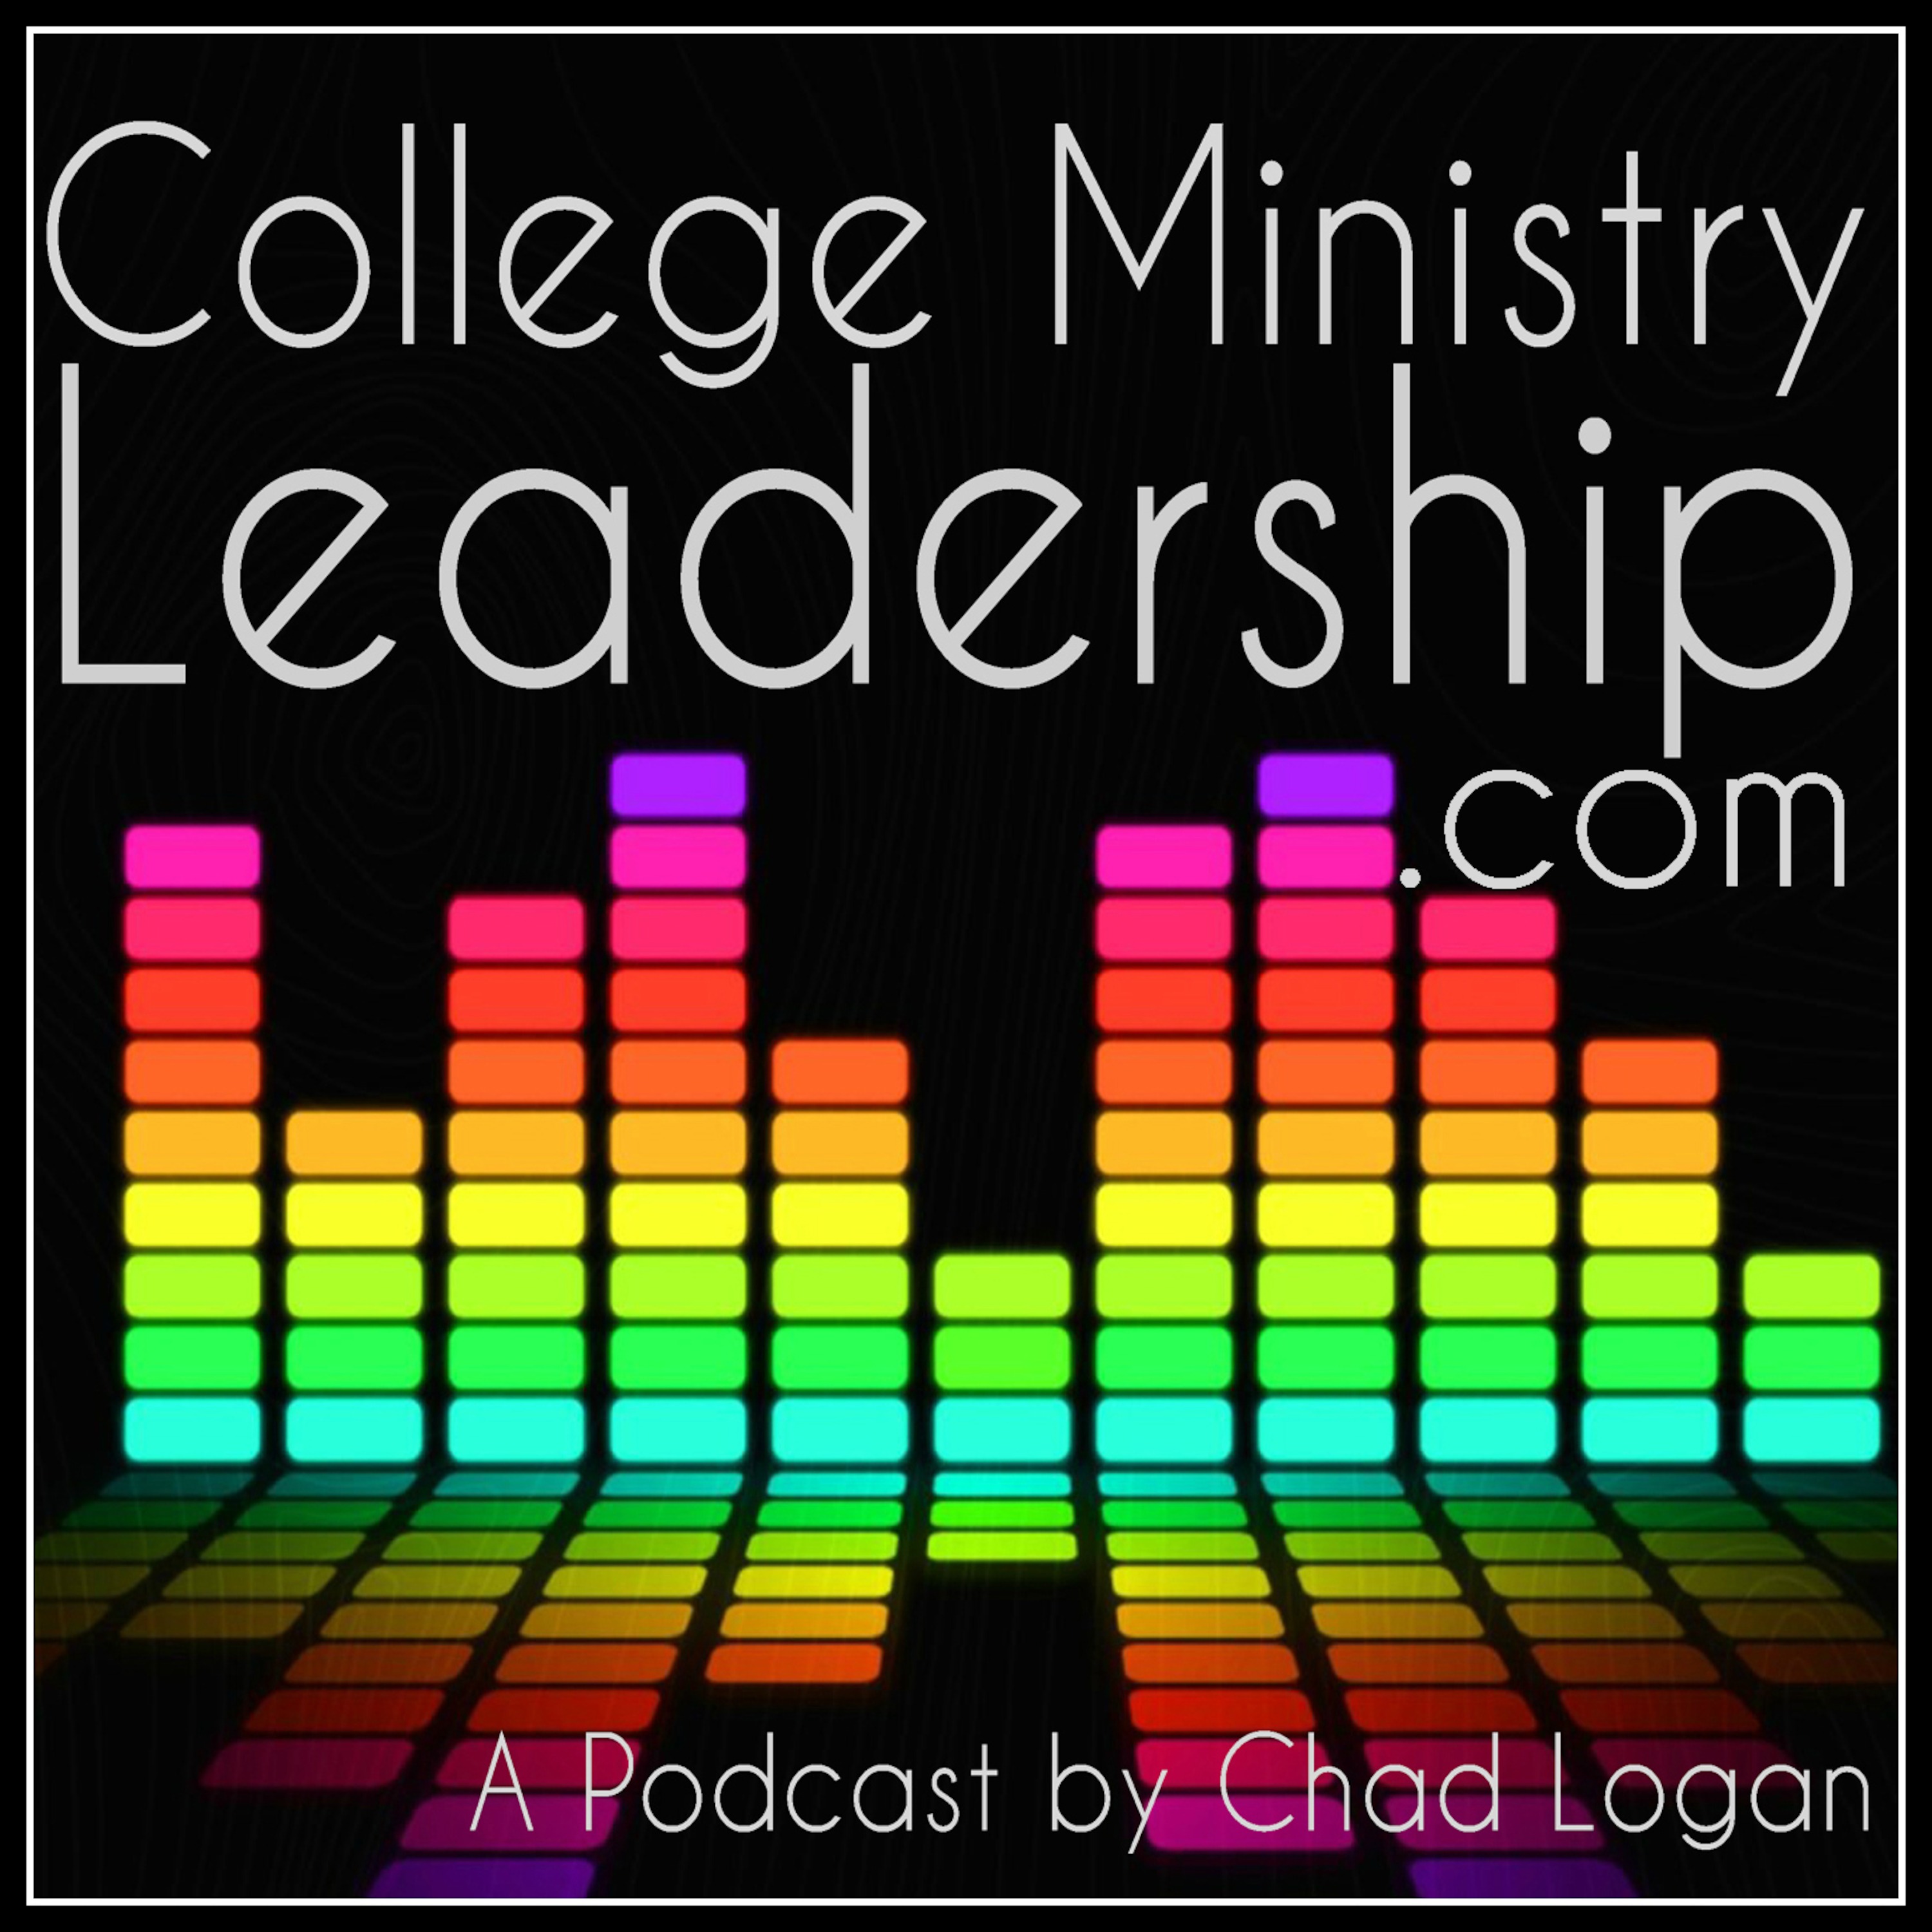 College Ministry Leadership